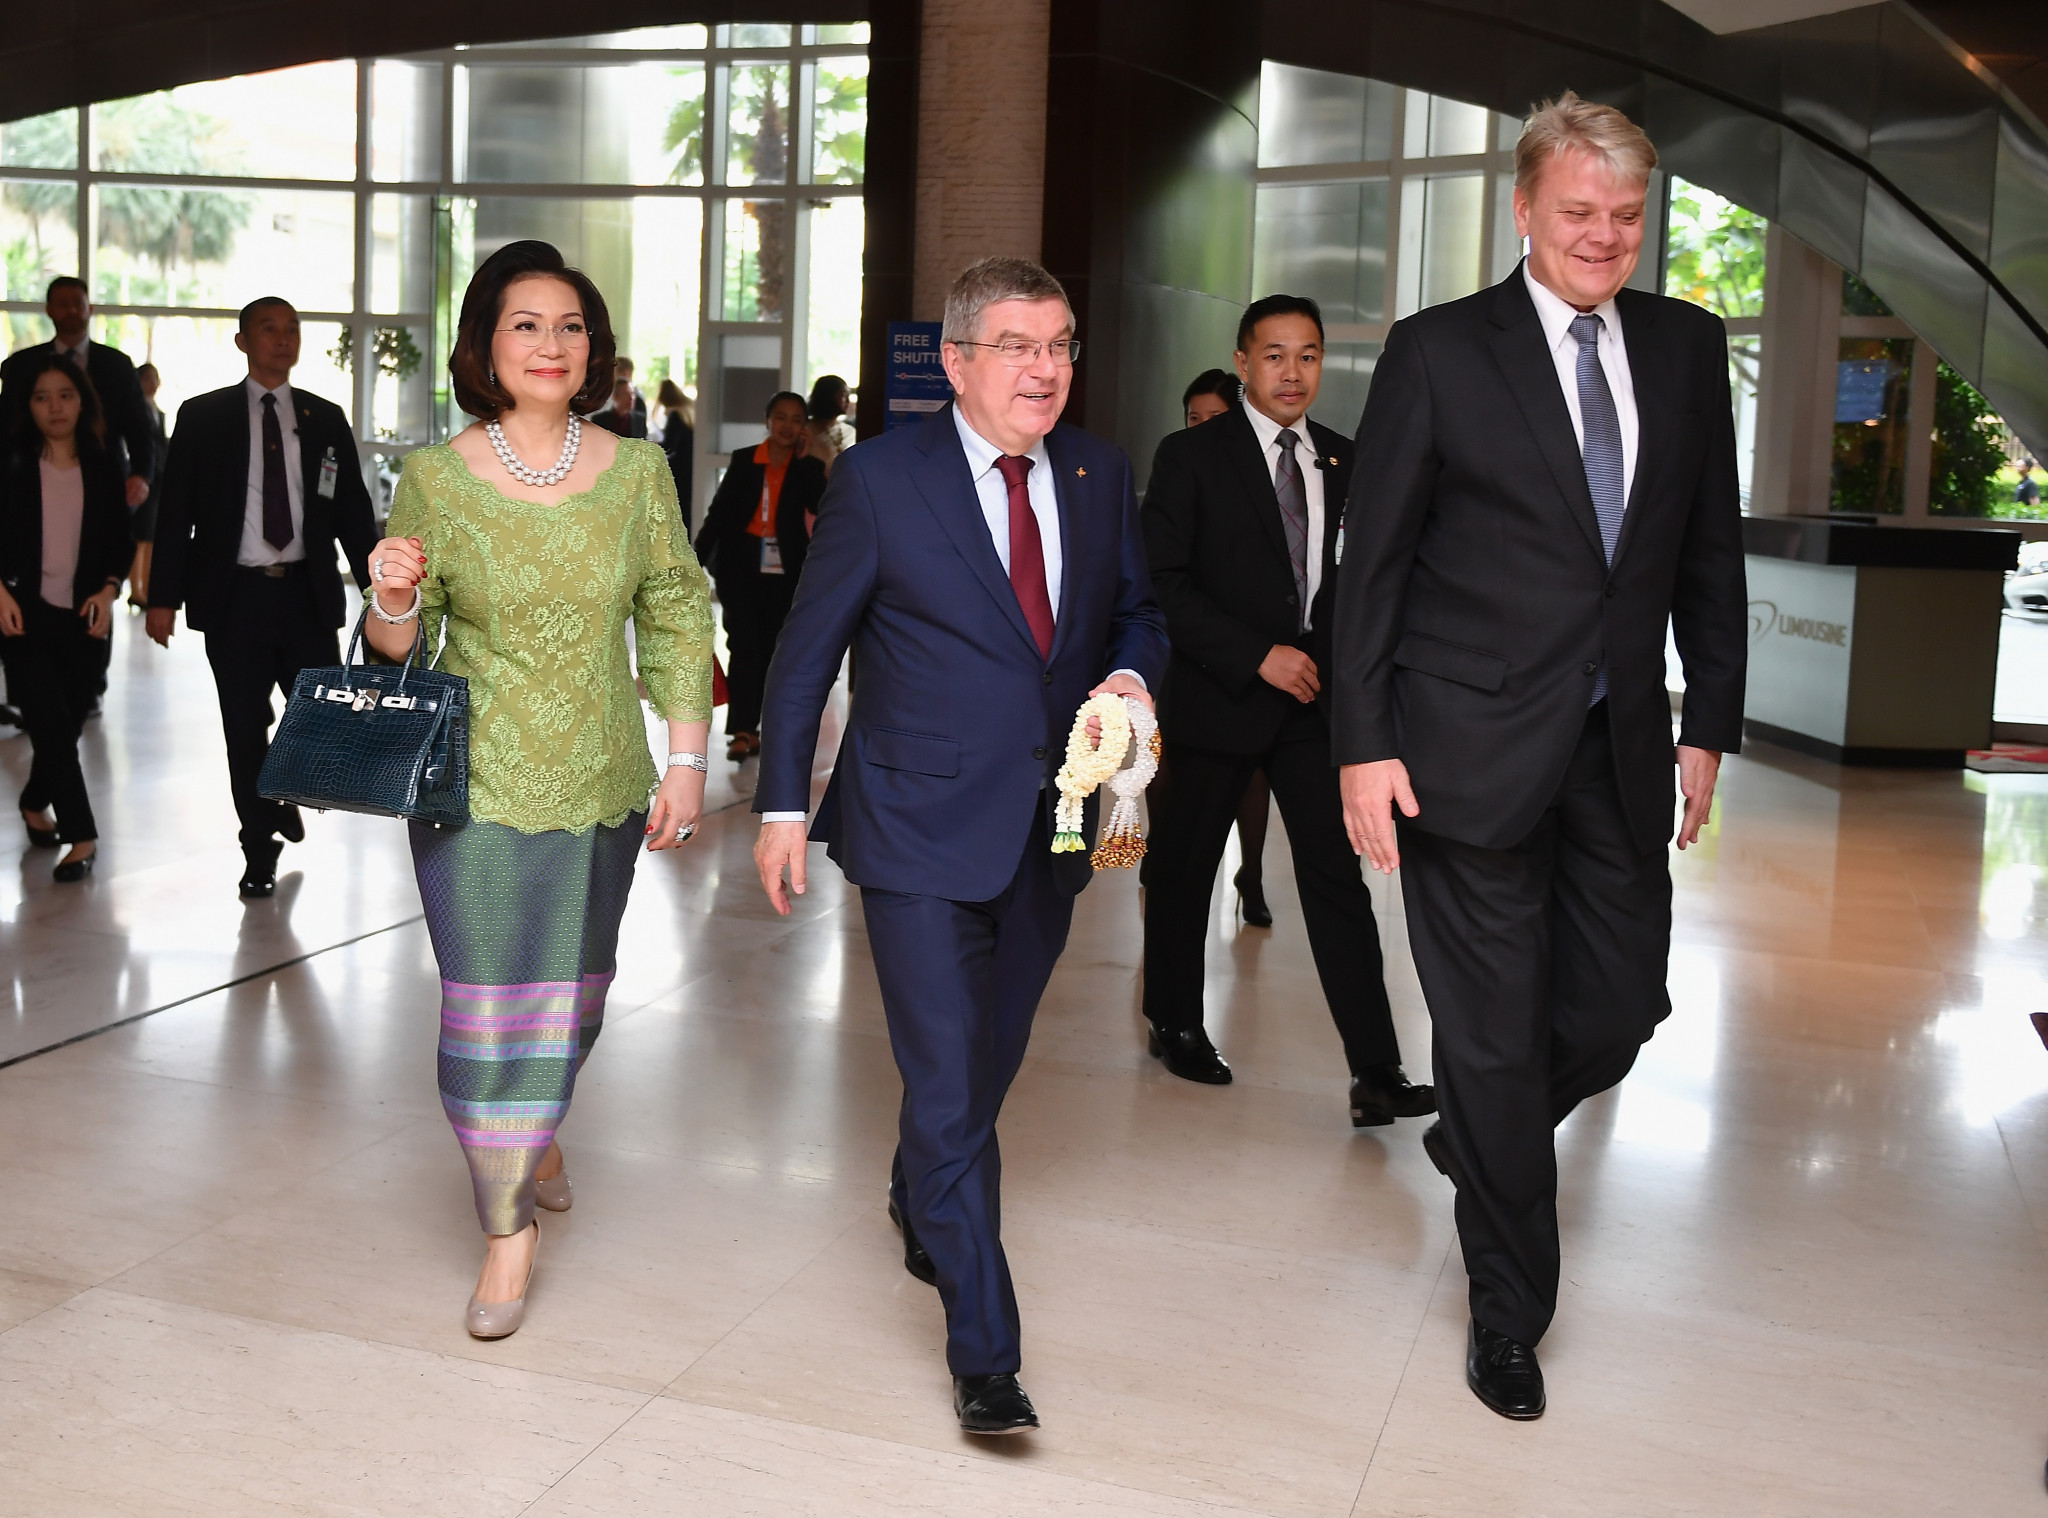 International Olympic Committee (IOC) President Thomas Bach arrived in Bangkok on day one of SportAccord Summit in Thailand's capital ©Getty Images